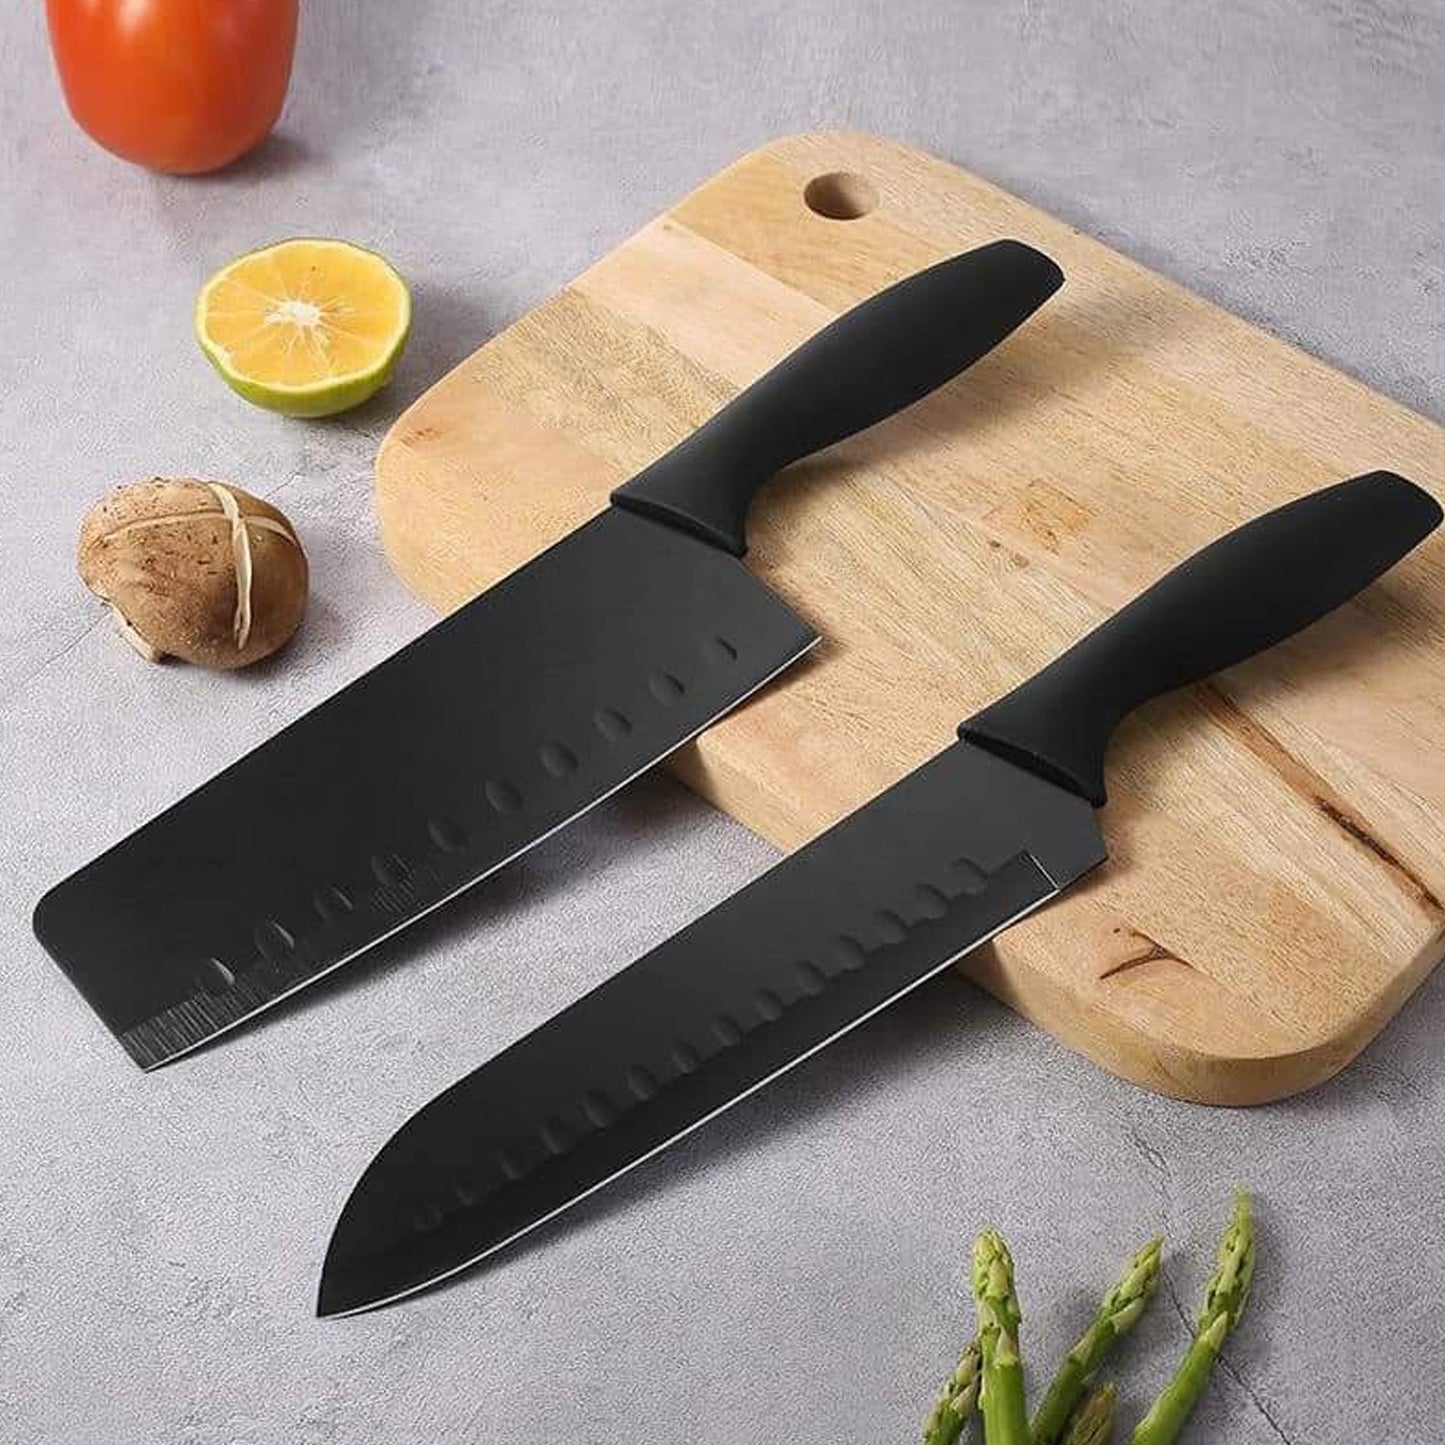 5911 Kitchen Chef Cutlery Stainless Steel Knife Set, Chopping Knife, Chef Knife, Utility Knife, Butcher Knife (Pack of 5pc). JK Trends